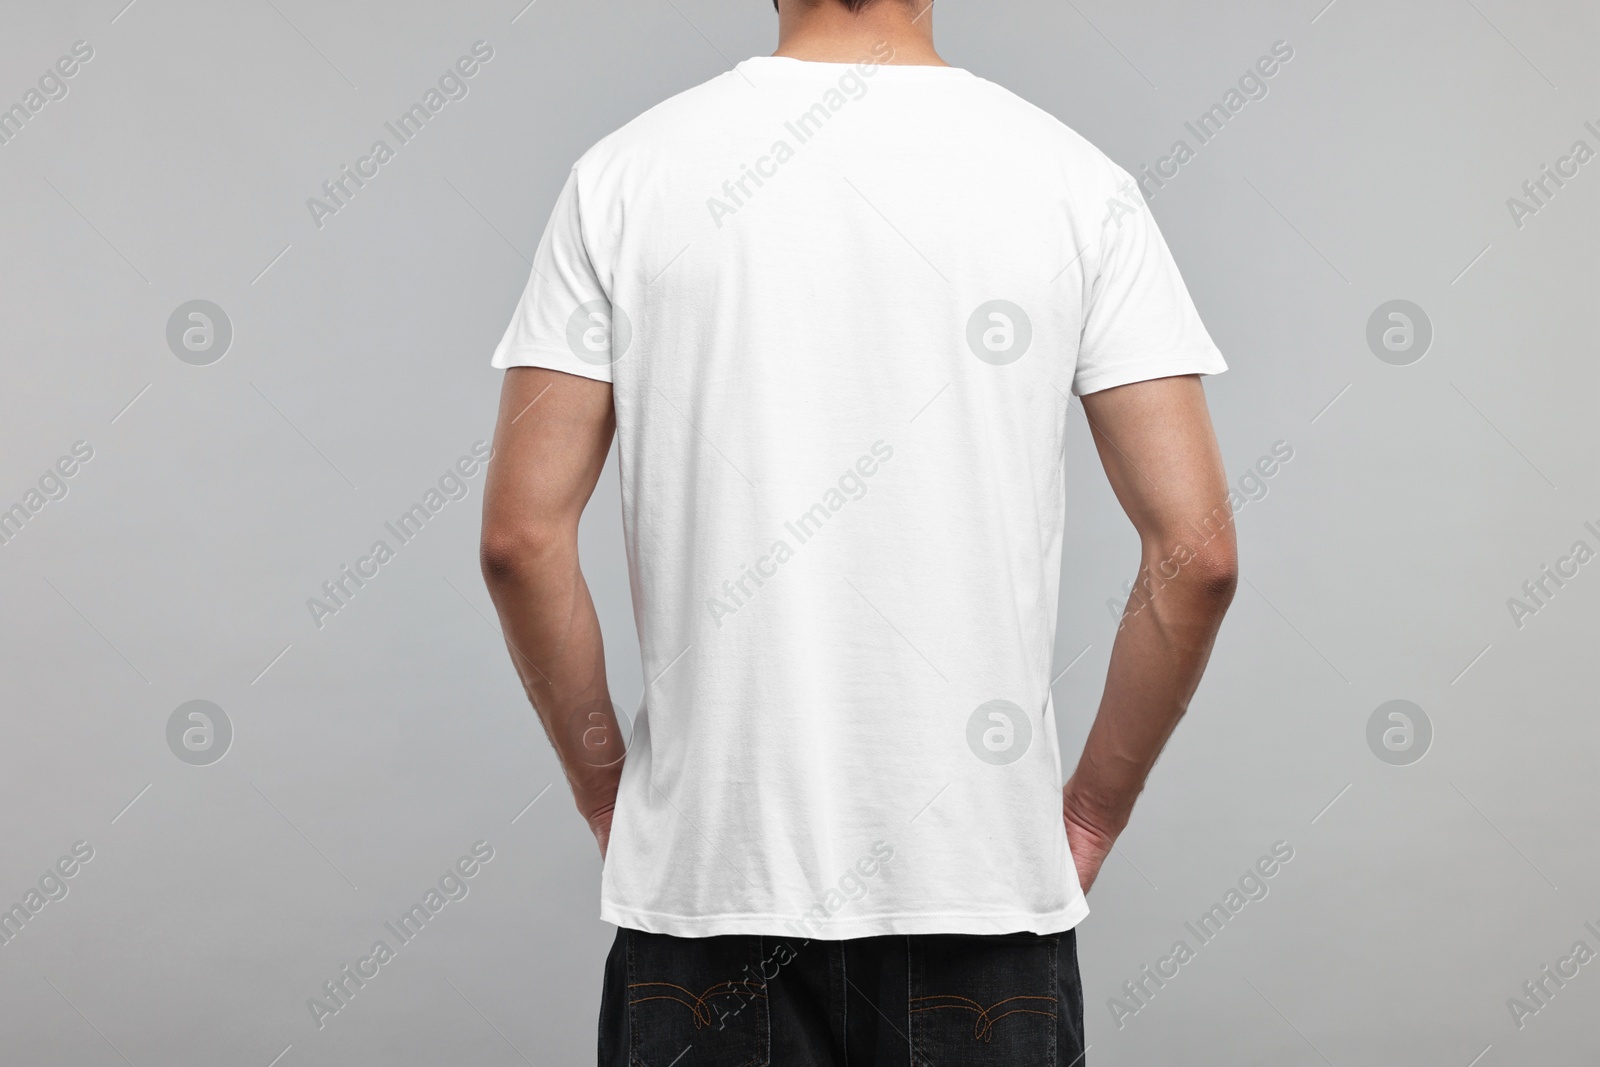 Photo of Man in white t-shirt on grey background, back view